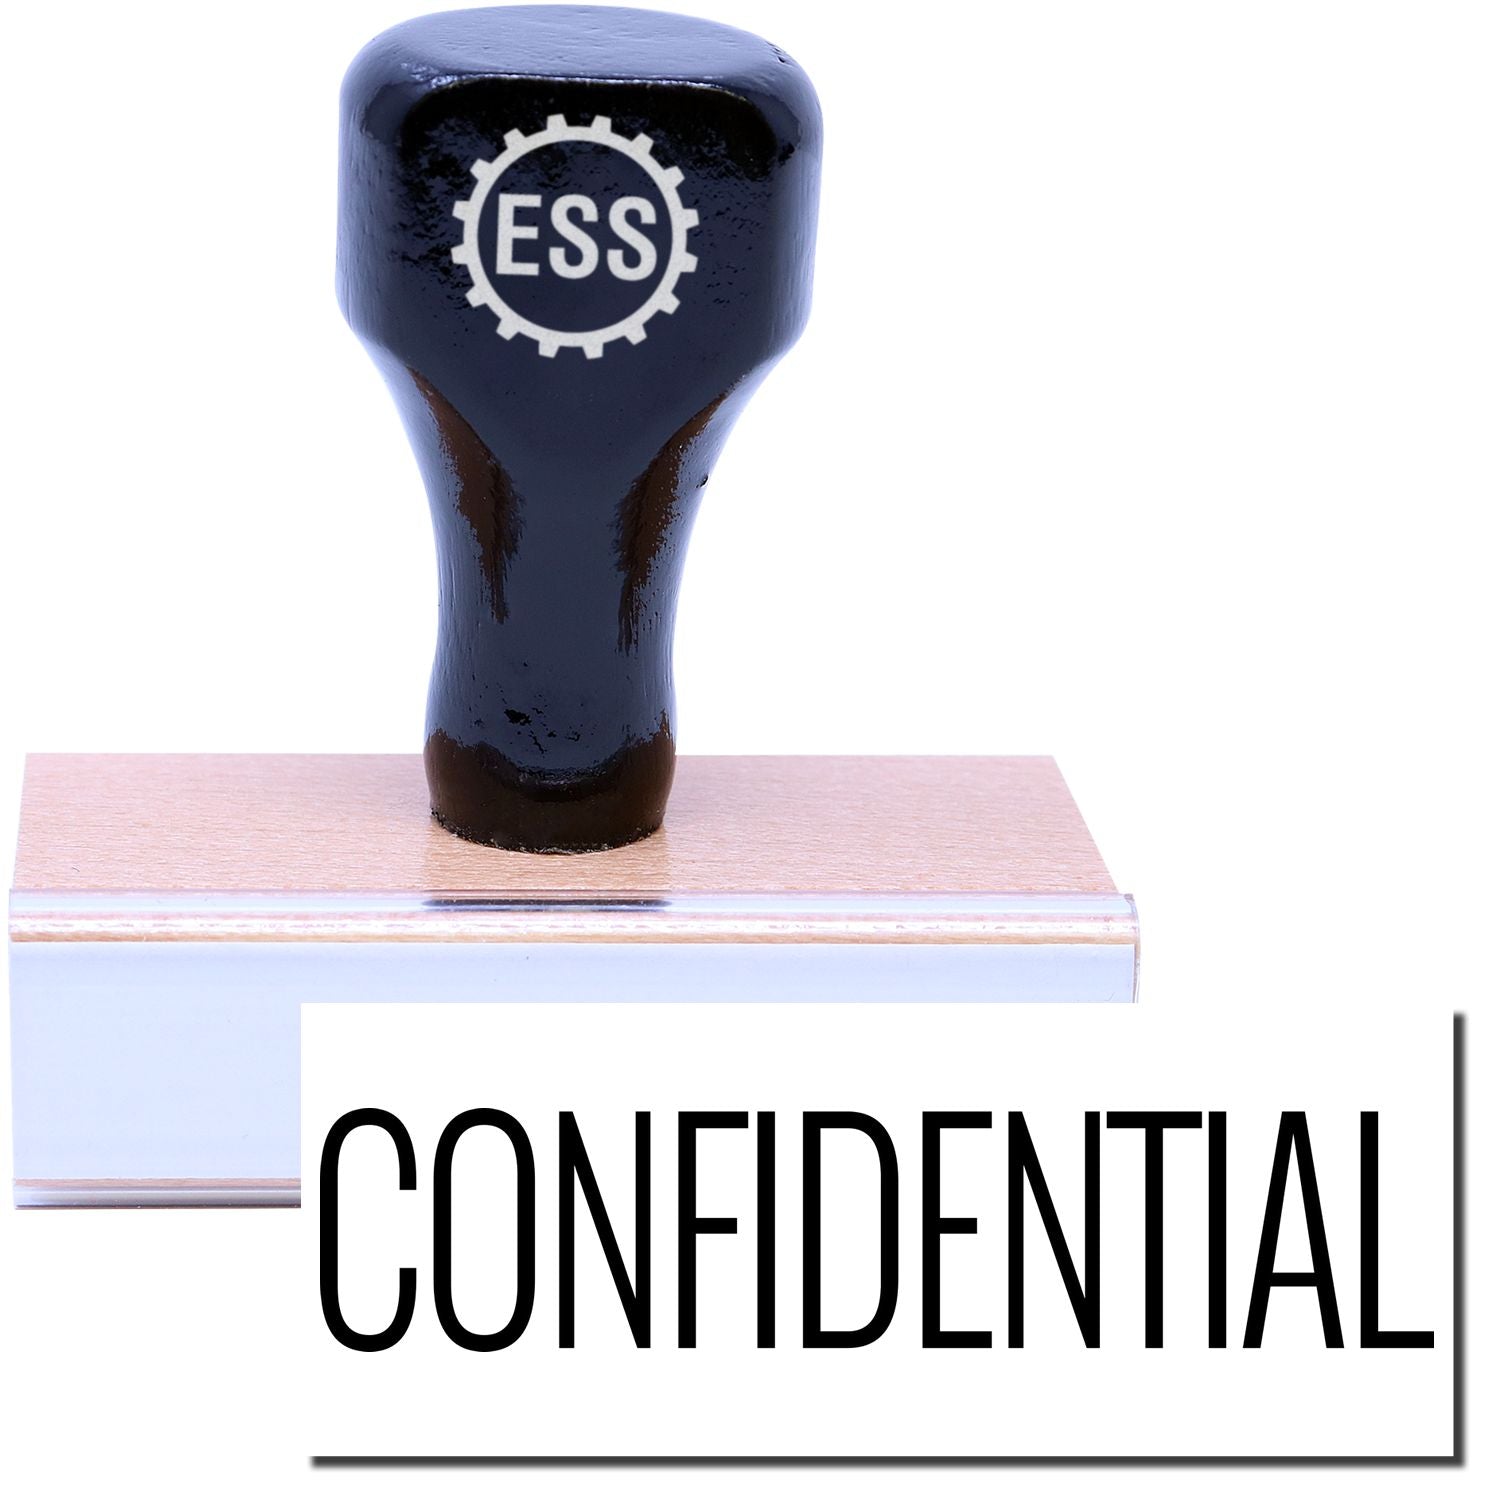 A stock office rubber stamp with a stamped image showing how the text "CONFIDENTIAL" in a large narrow font is displayed after stamping.